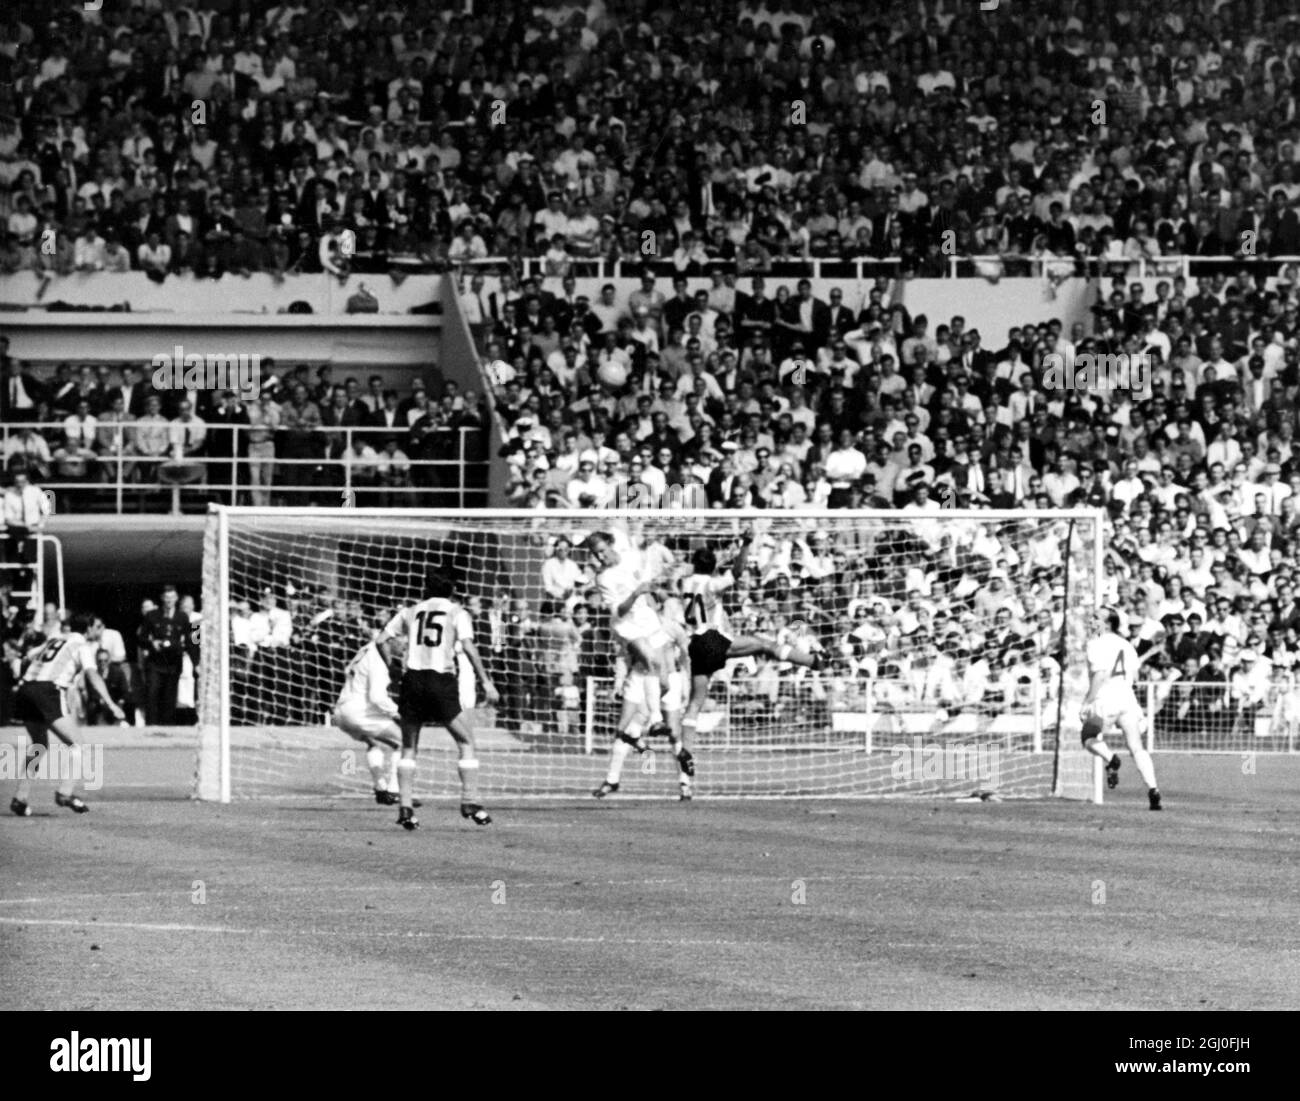 1966 World Cup England v Argentina Jack Charlton beats Mas (No.21) of Argentina in a heading duel during the World Cup quarter final match at Wembley. Also pictures are Cohen, Banks and Stiles of England, and Artime and Solari of Argentina. 23rd July 1966. Stock Photo